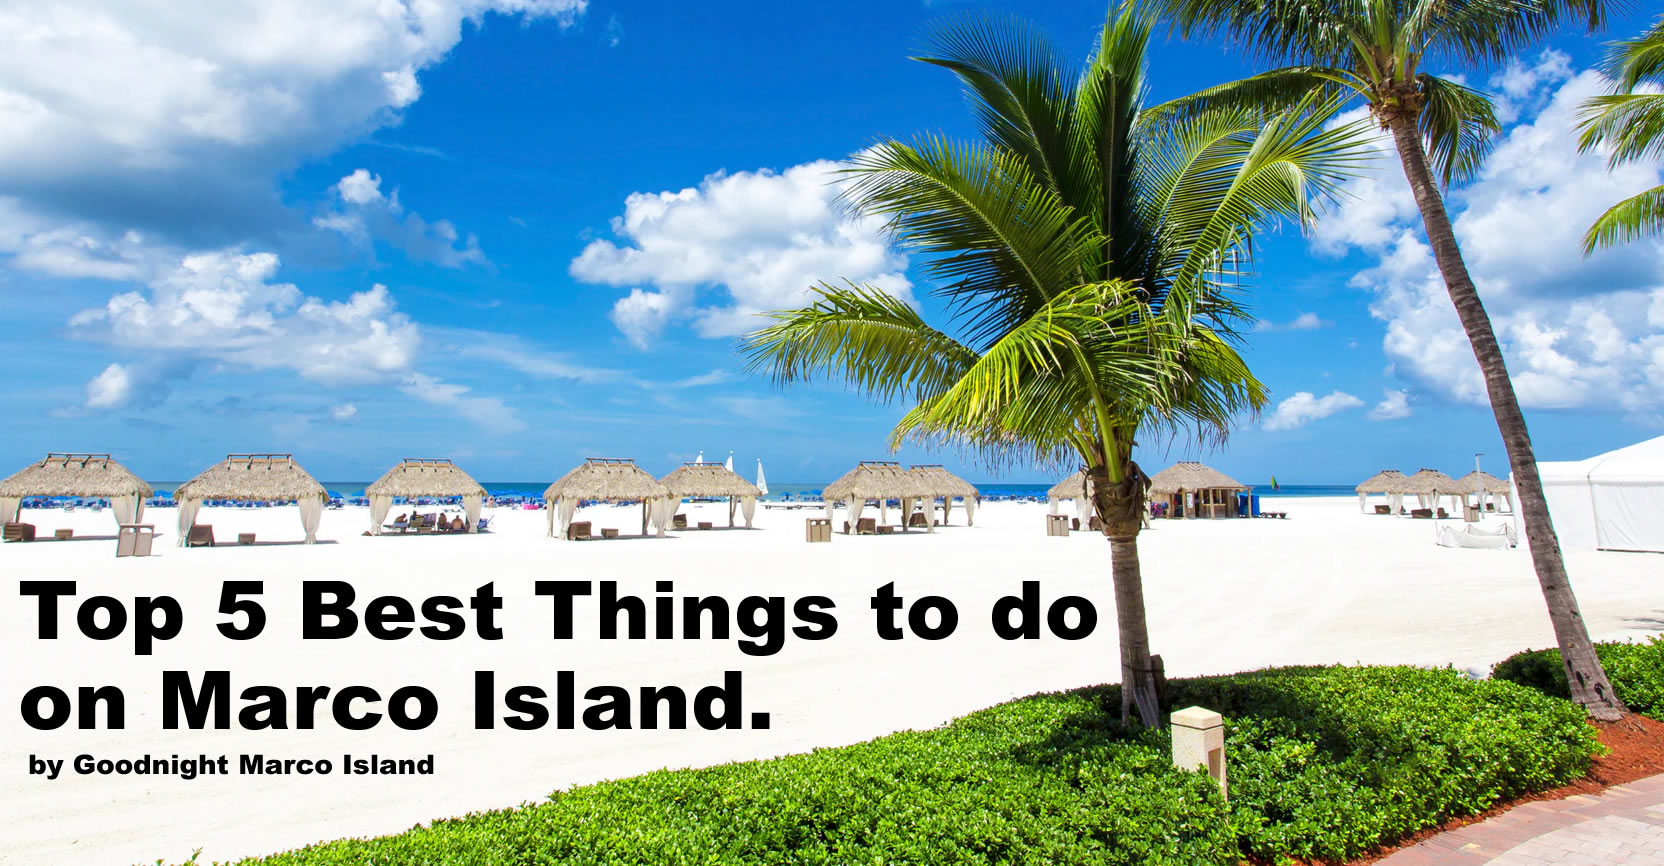 Top 5 Best Things to do on Marco Island